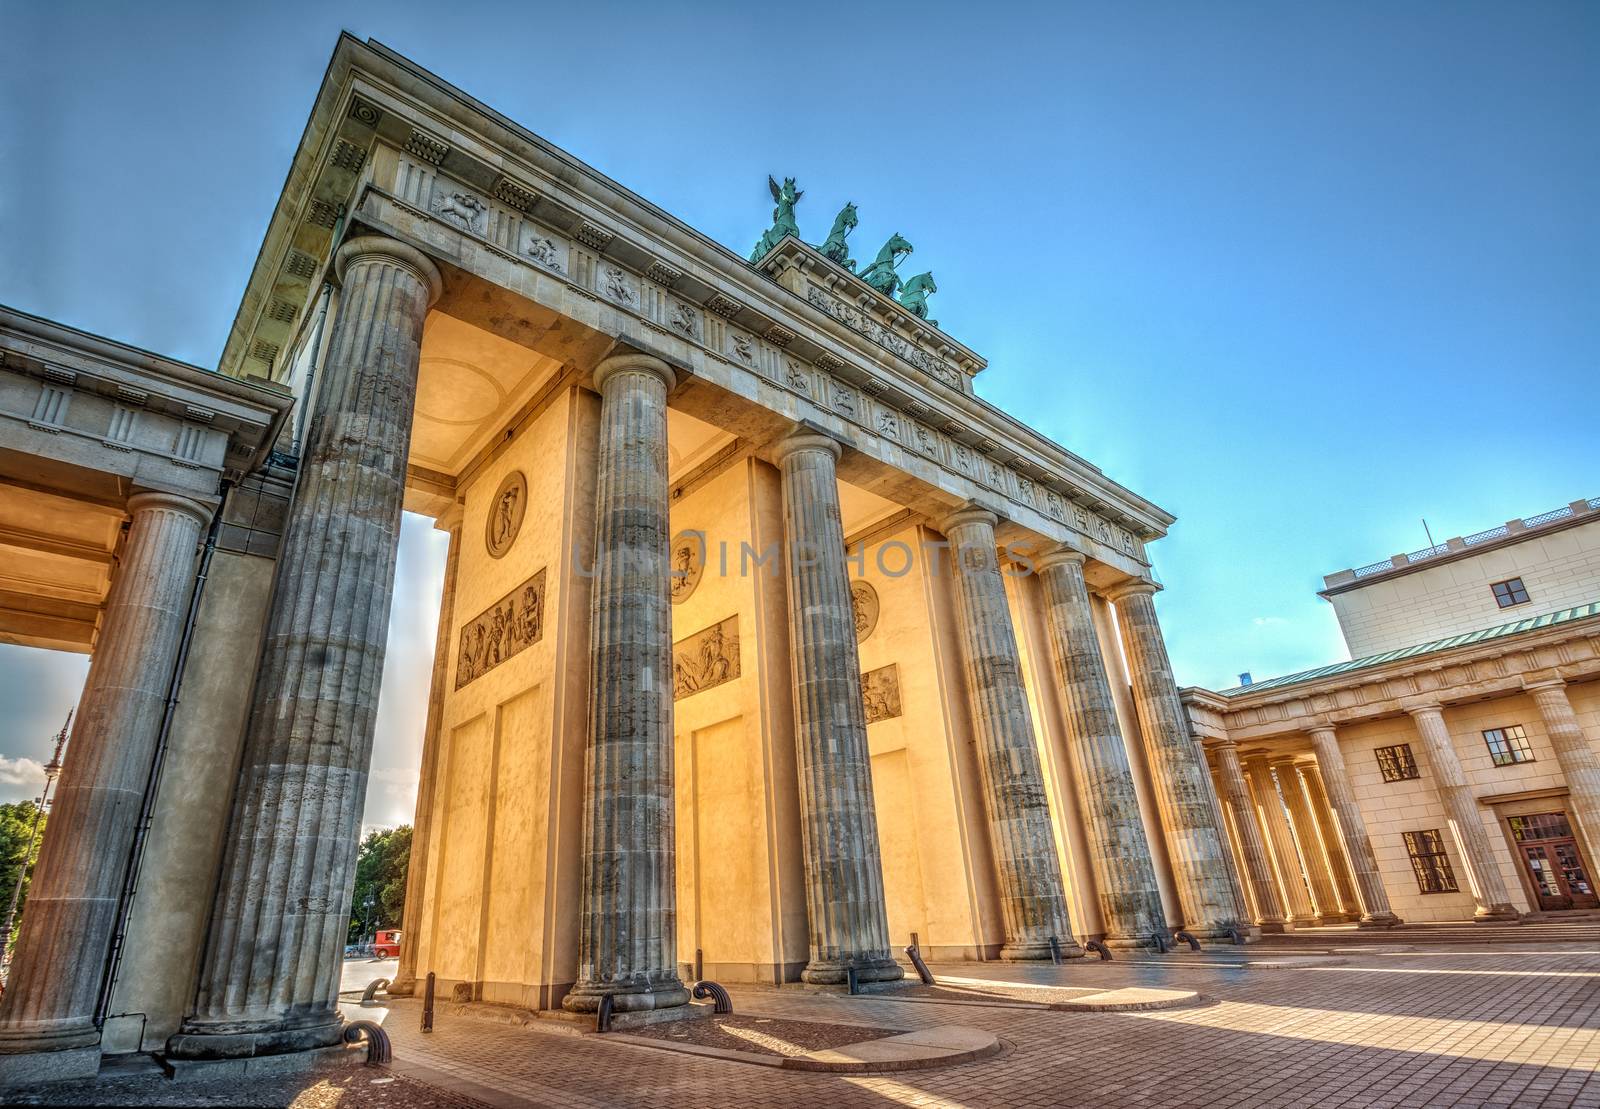 Brandenburg Gate from 1788 at sunset in Berlin, Germany. Hdr image.